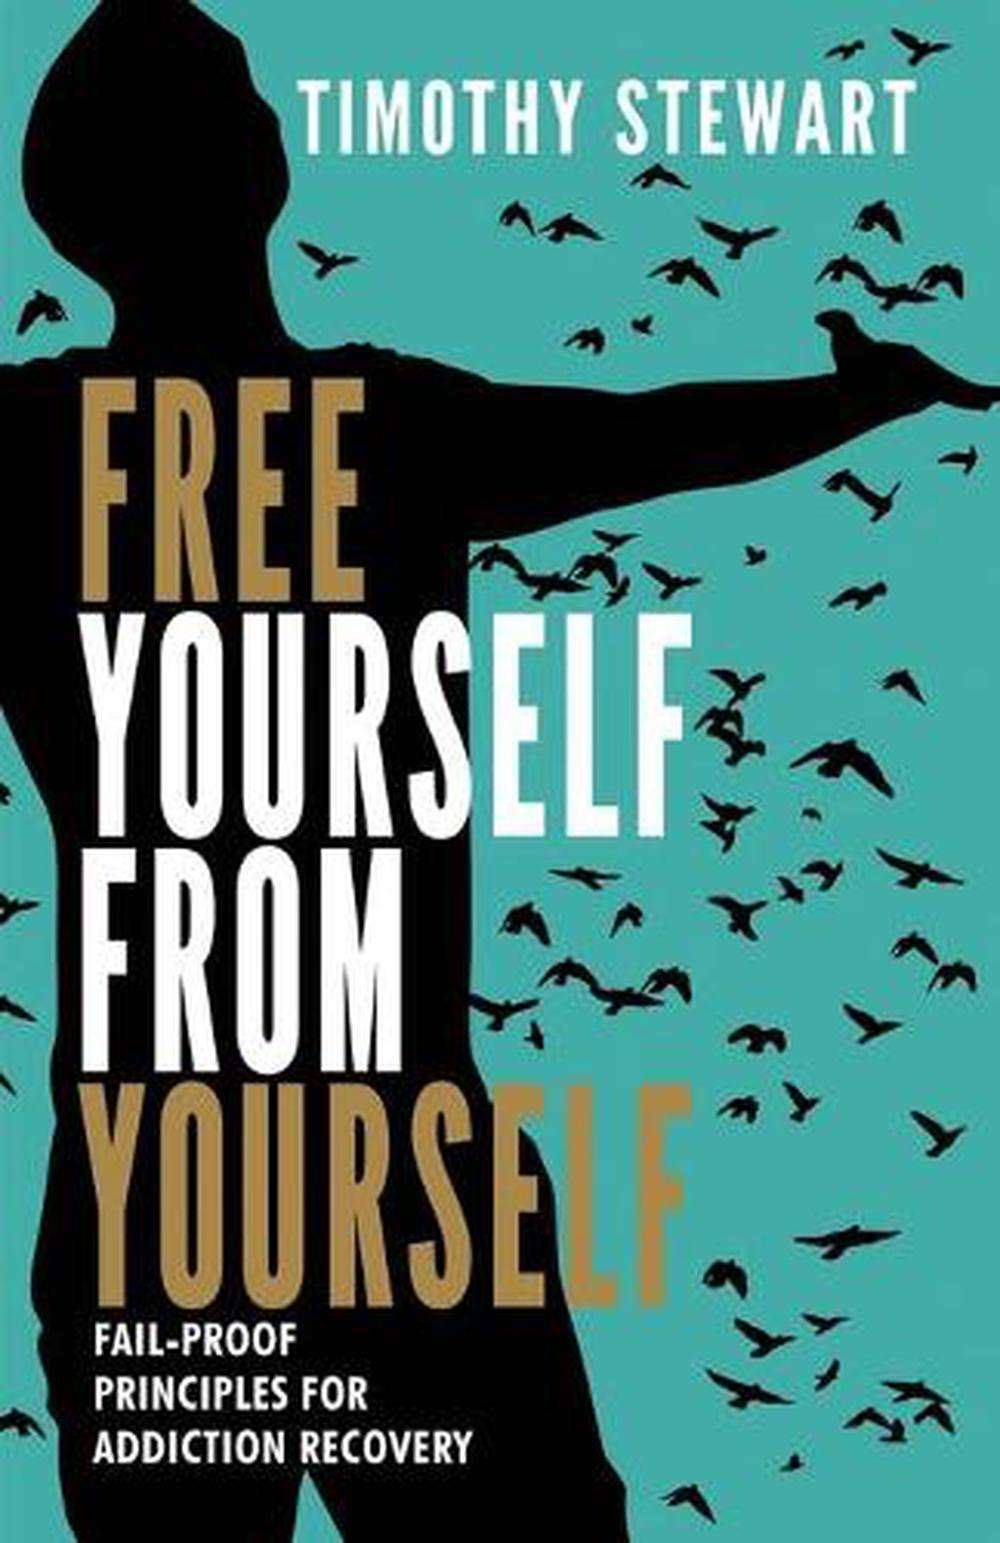 FREE YOURSELF FROM YOURSELF: FAIL